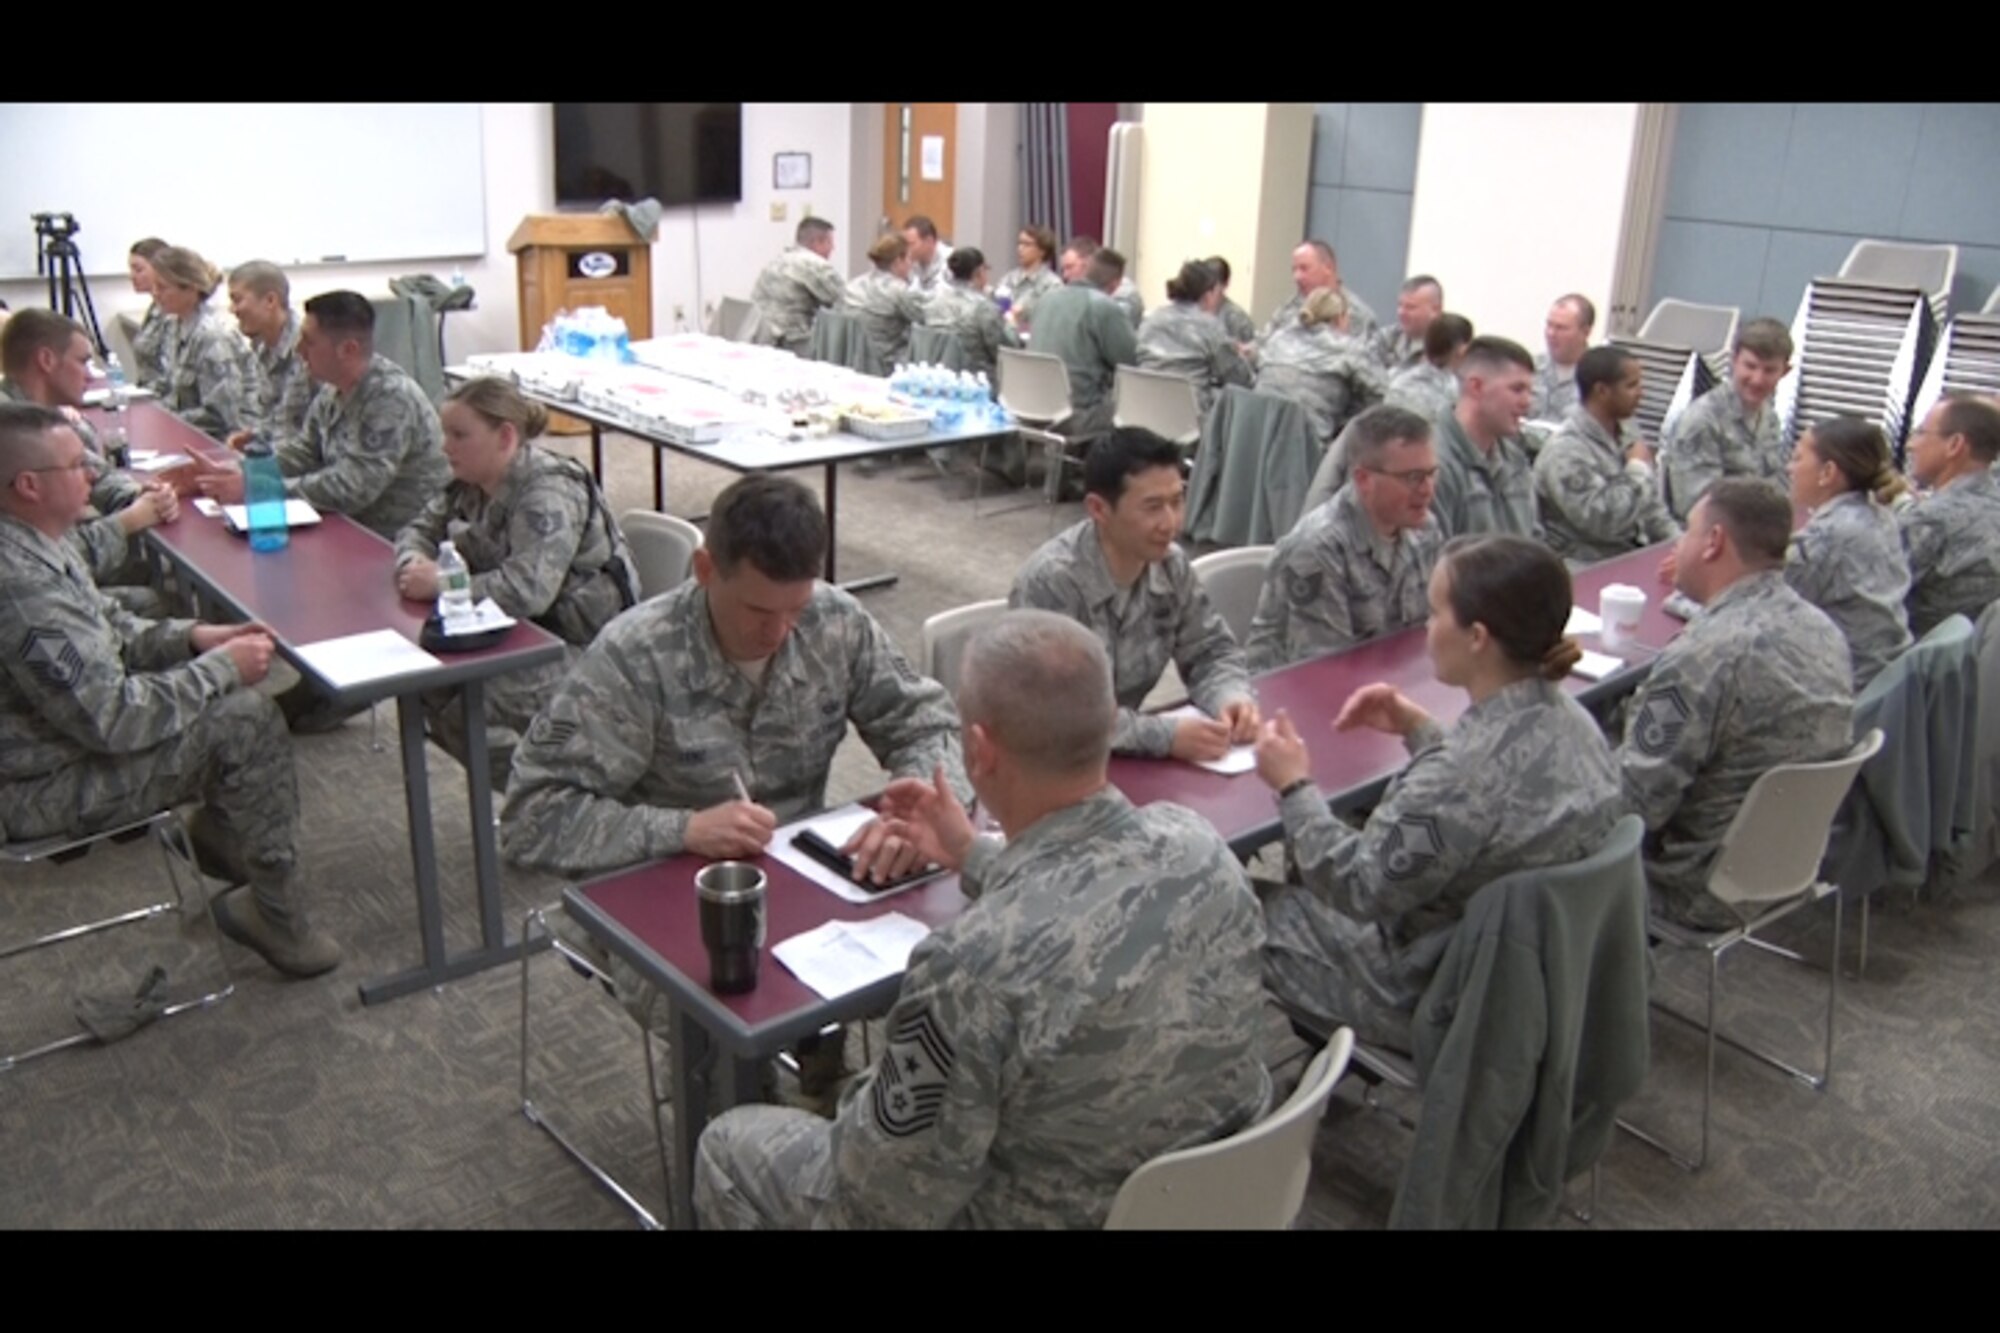 NCO’s question Senior NCOs on topics ranging from personal experience to career environments at Pease Air National Guard Base, N.H. Feb. 5. The speed-mentoring event was created as an opportunity for NCOs to build professional relationships and aid their military career. (N.H. Air National Guard still from video by Tech. Sgt. Erica Rowe)